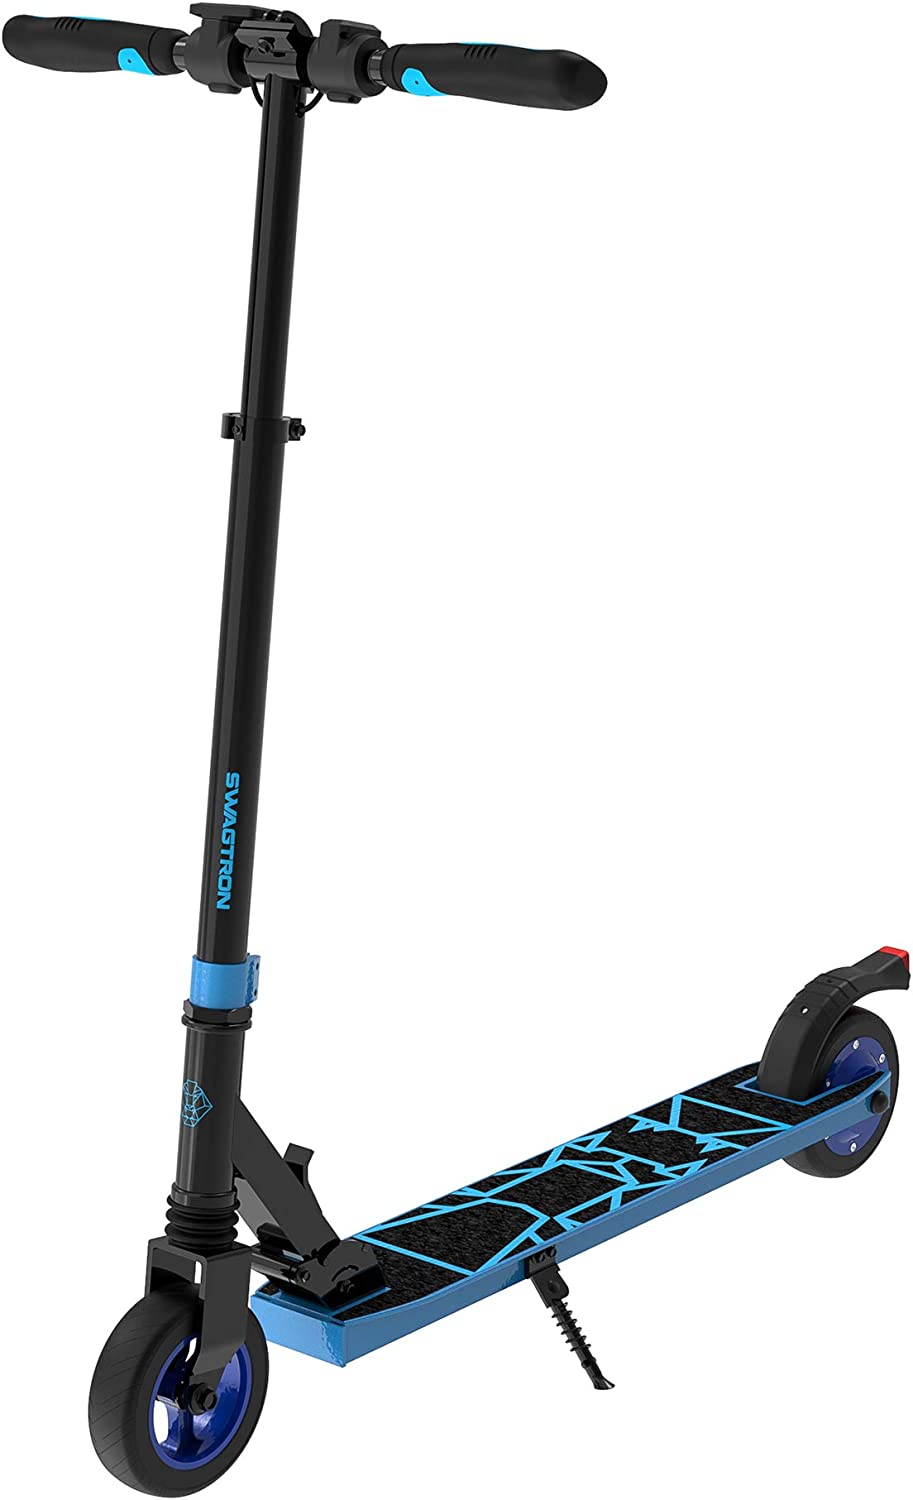 Swagtron SG-8 Swagger 8 Lightweight Folding Electric Scooter for Kids & Teens - $110